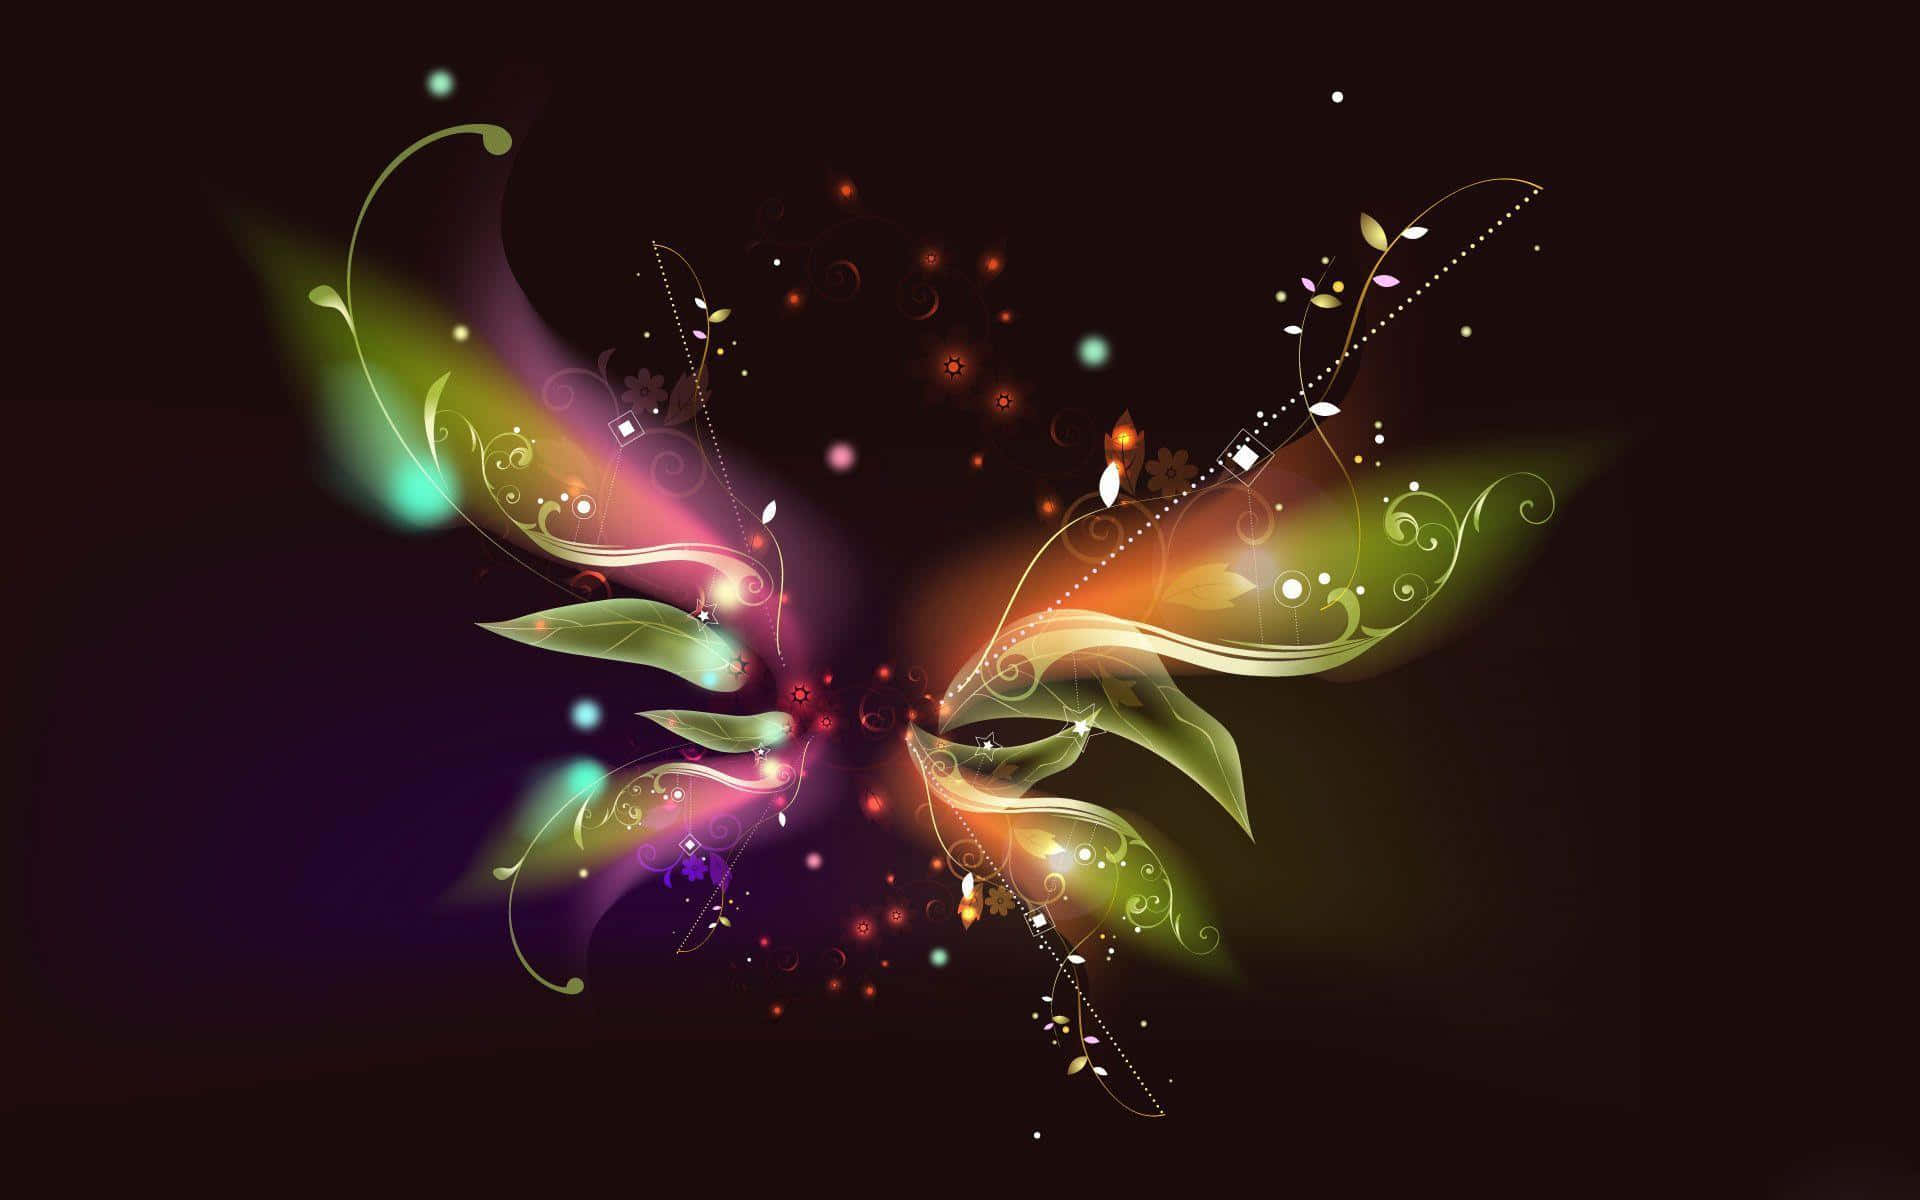 Free Cool Butterfly Wallpaper Downloads, [100+] Cool Butterfly Wallpapers  for FREE 